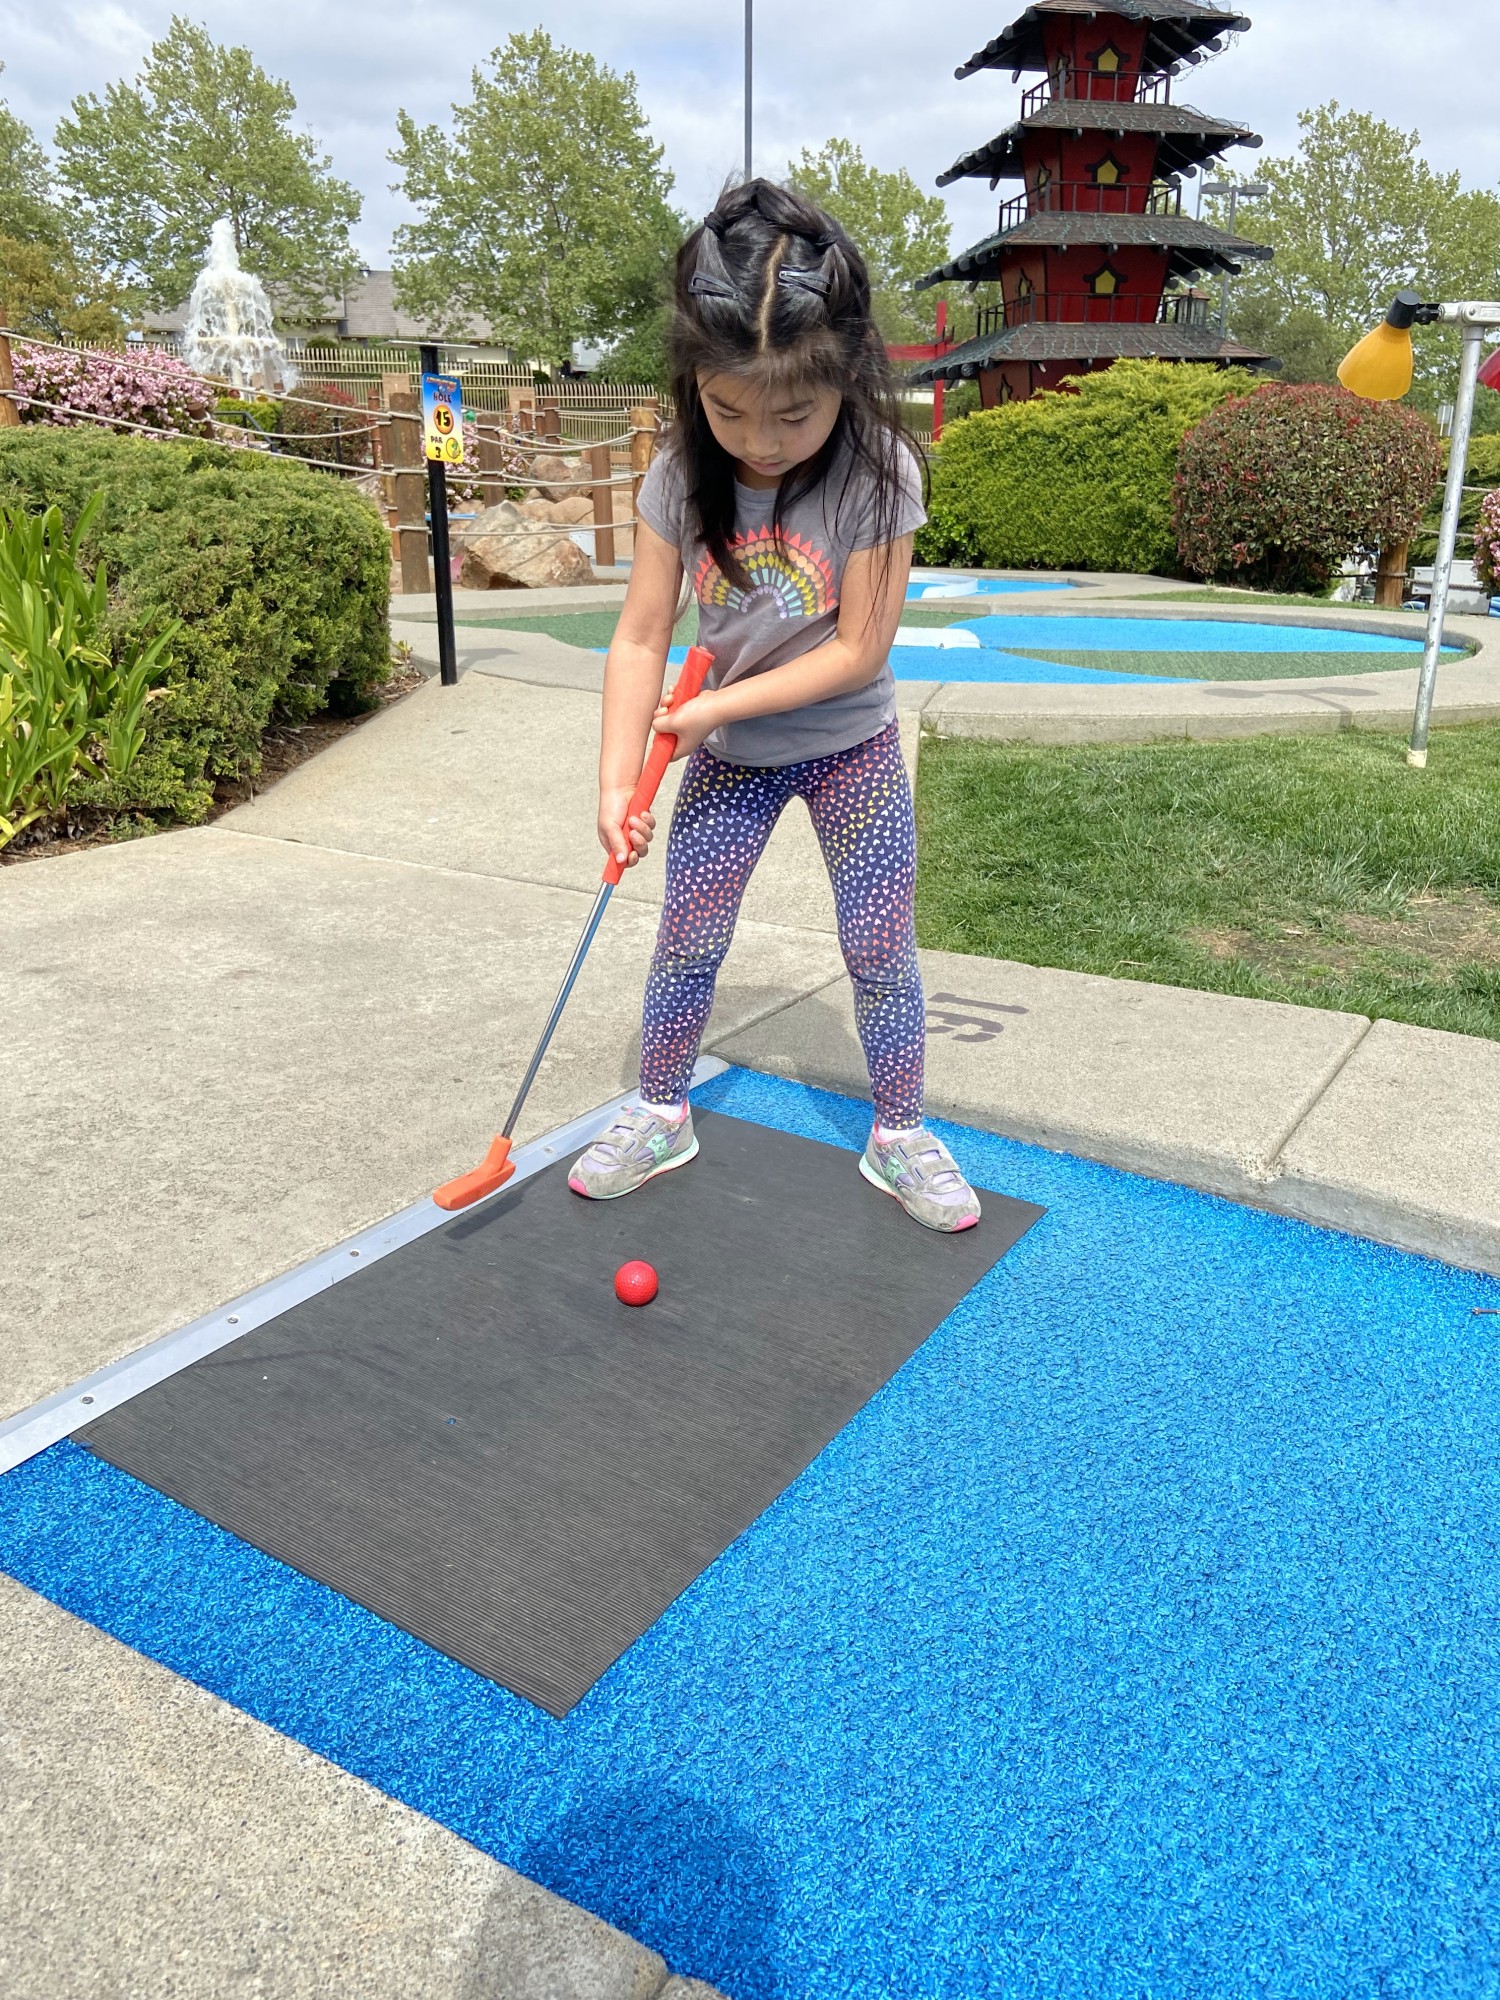 We stopped at a Golfland and played mini golf for the first time!